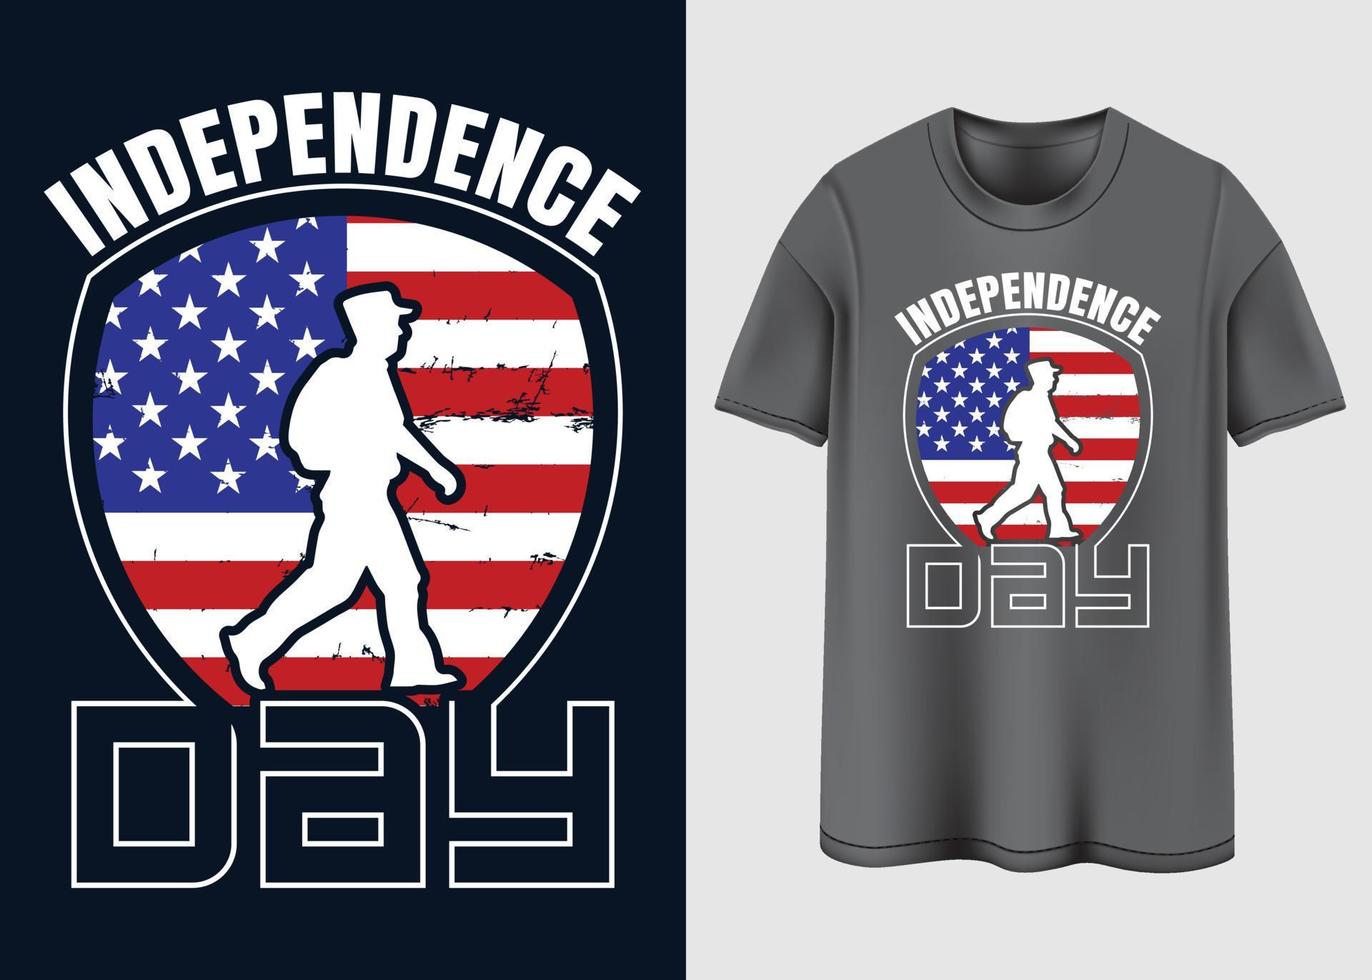 Happy Independence Day T-shirt design vector